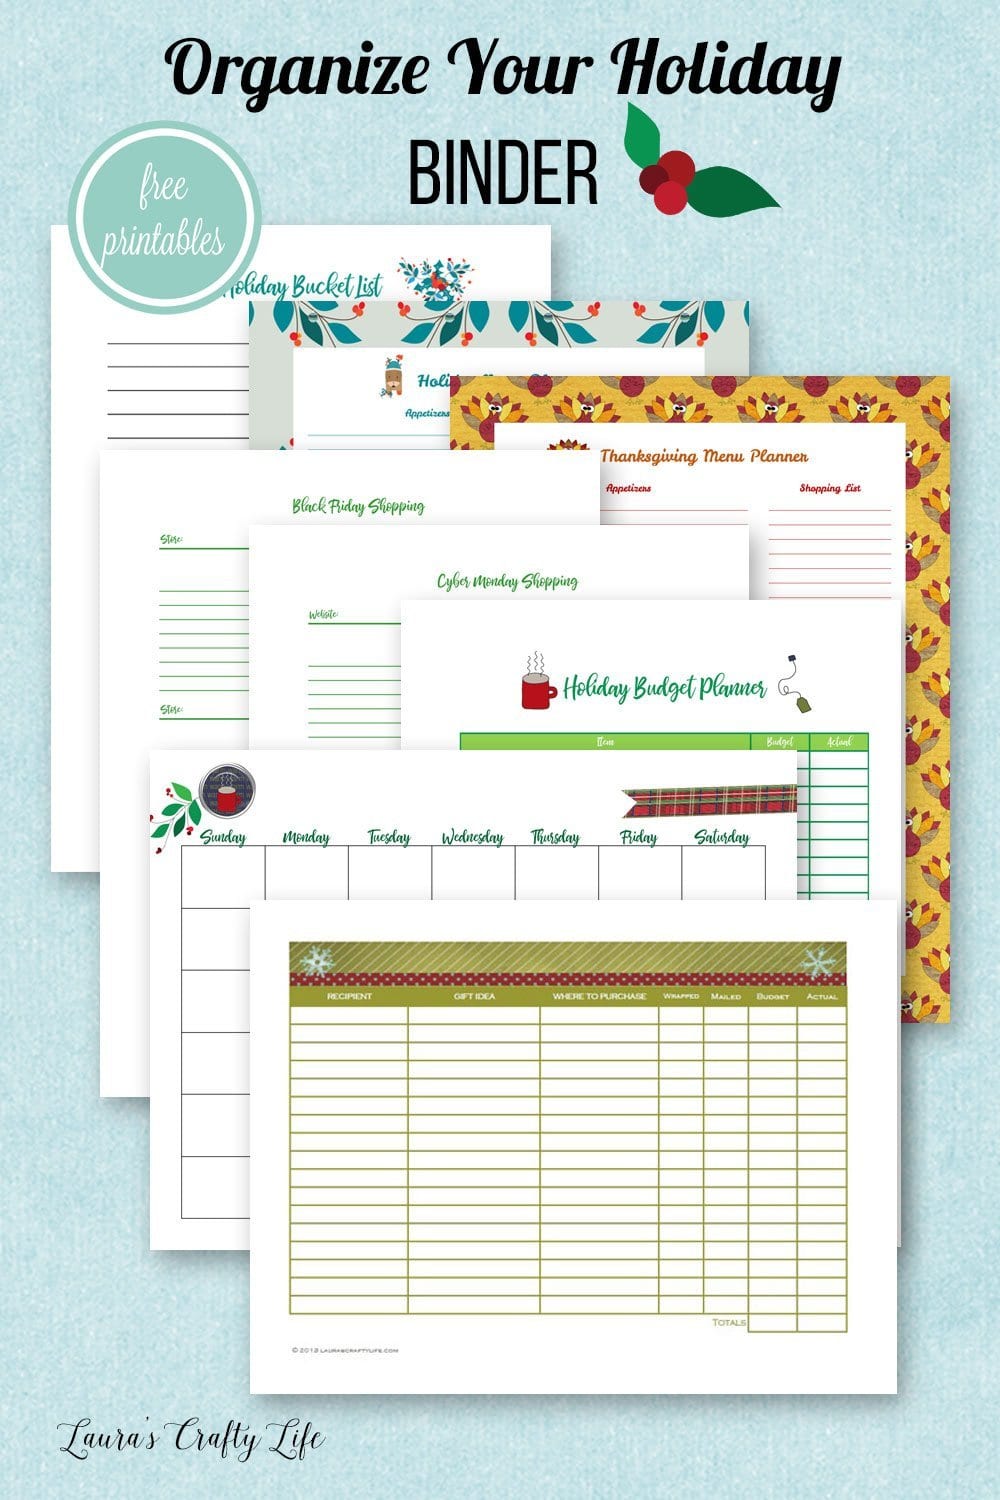 organize your holiday free printables